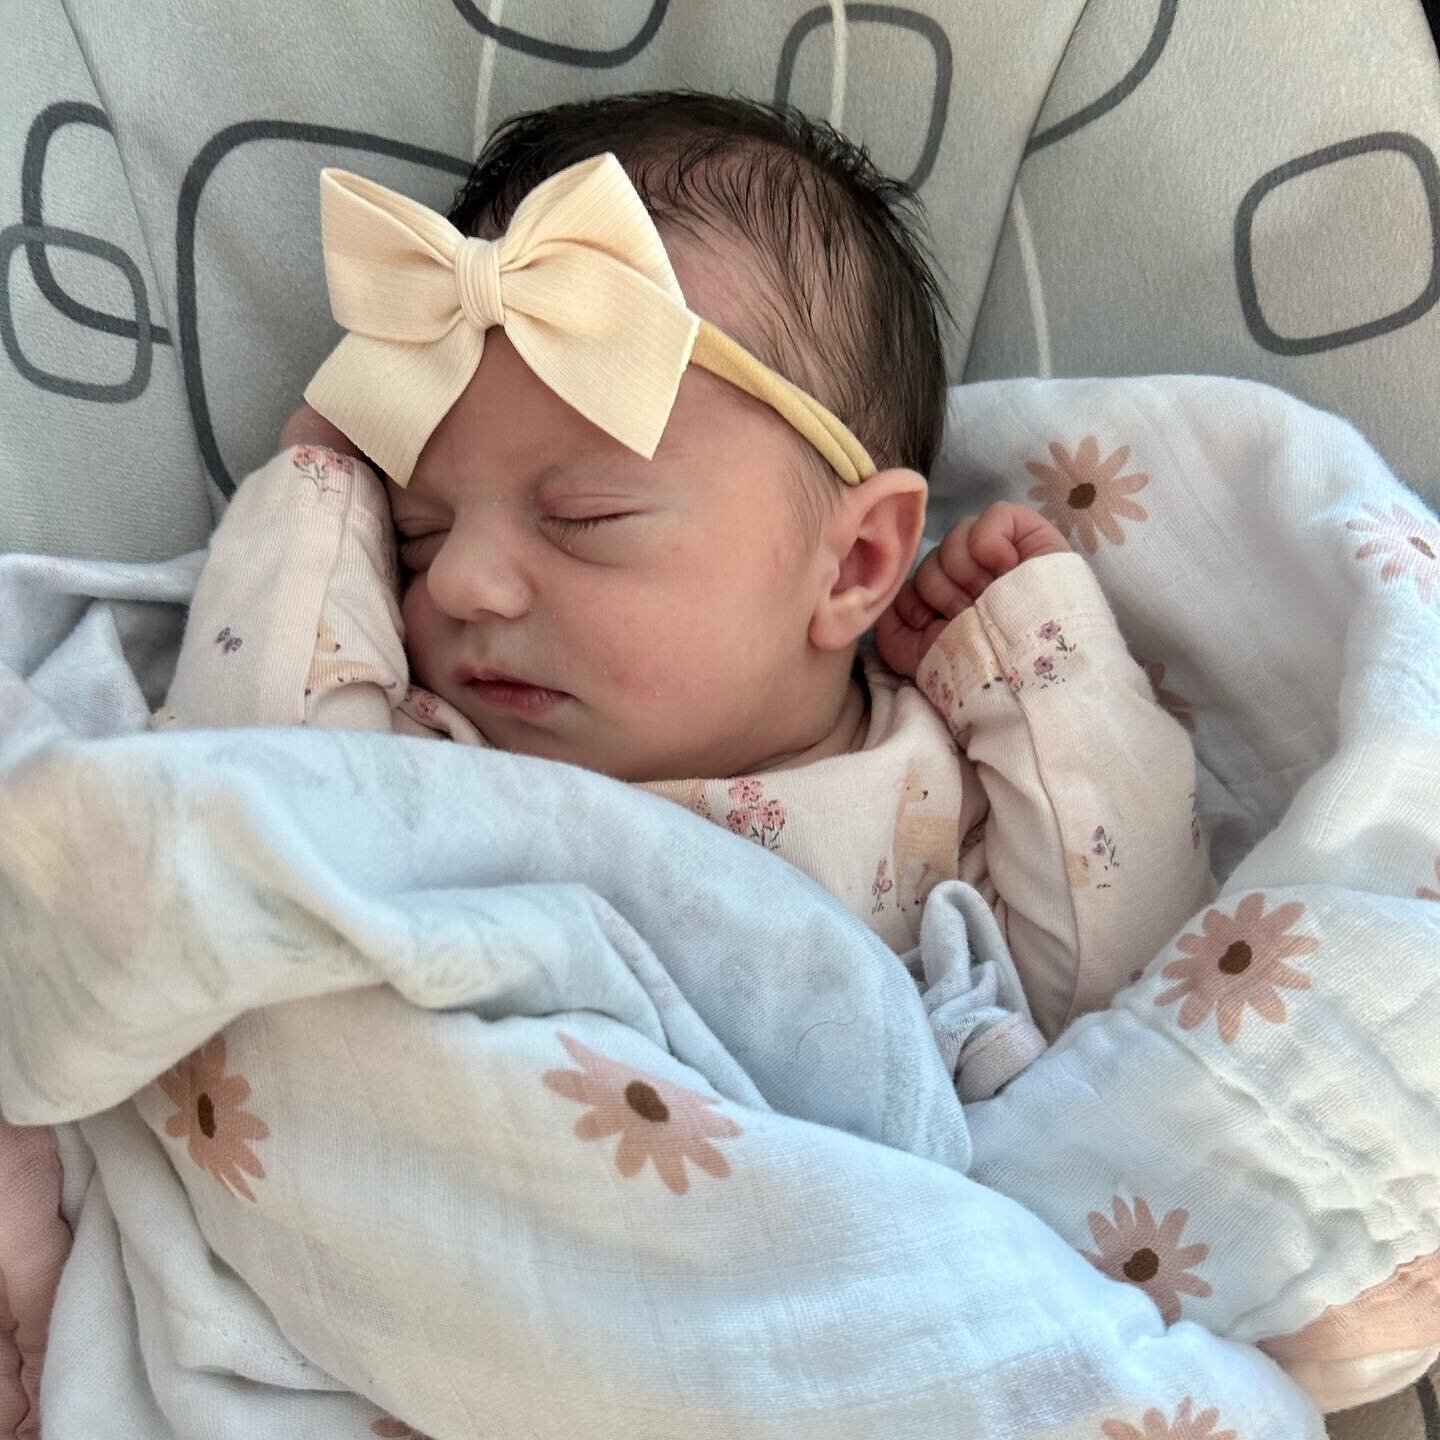 We&rsquo;d like to Congratulate our barber Brayden and his wife Josee on the birth of their beautiful daughter Penelope Rose. 
She was born February 14. 
Big brother Oliver loves her very much. 
Congratulations guys!